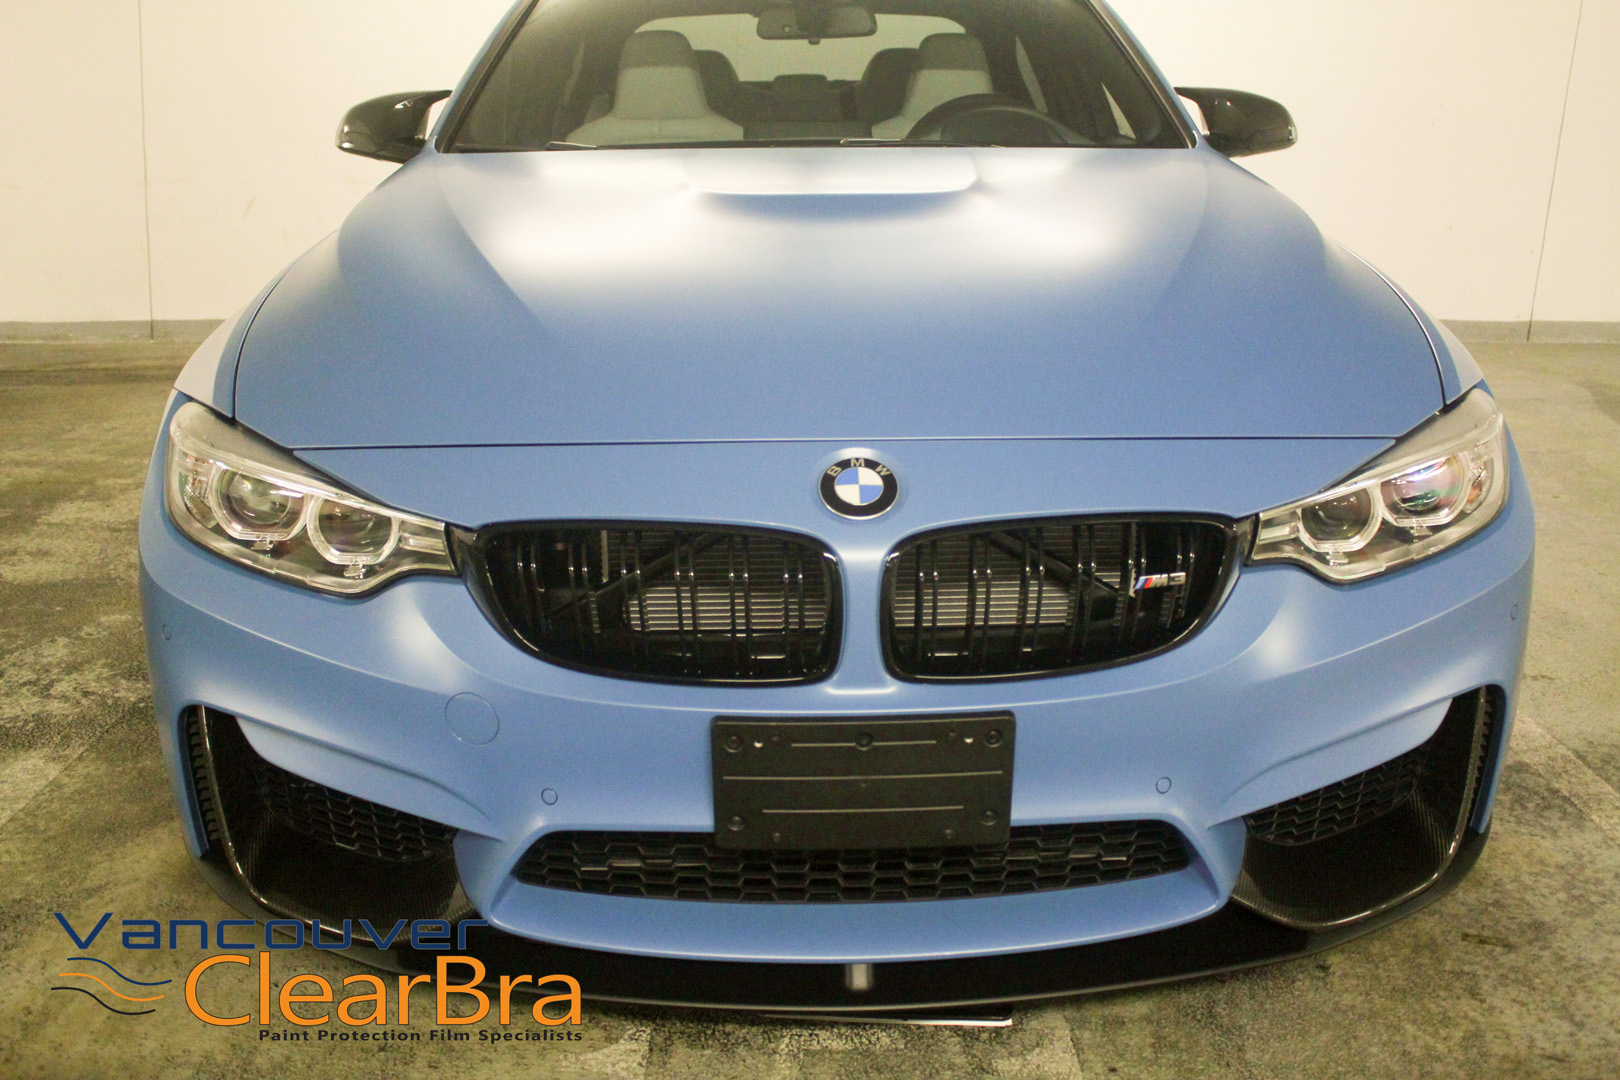 BMW M3 Xpel STEALTH Clear Bra - Vancouver ClearBra